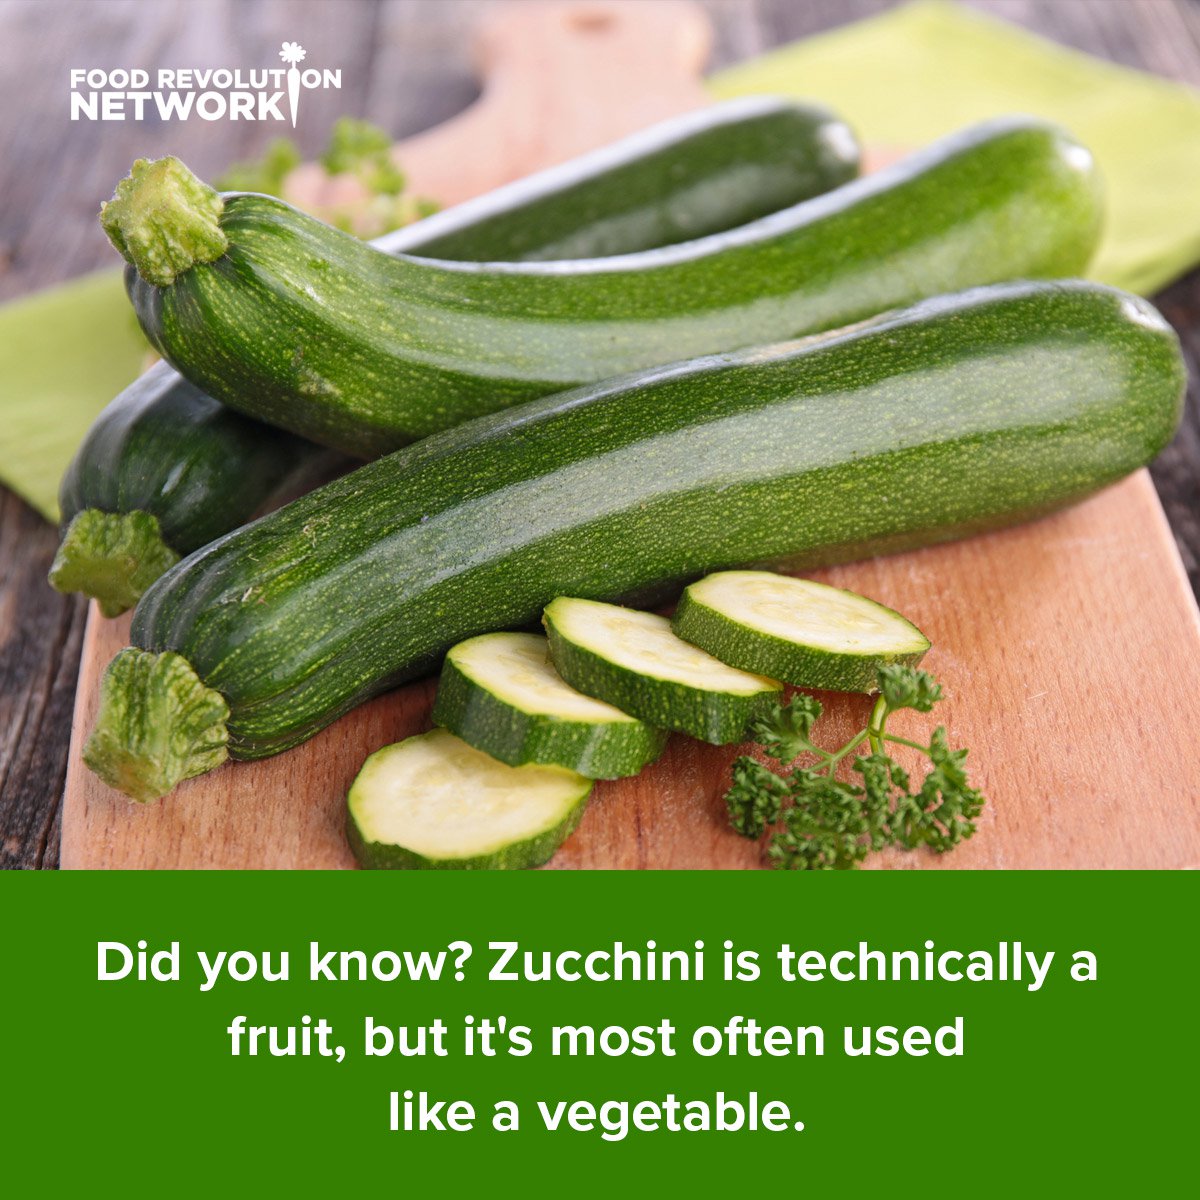 zucchini benefits: 9 reasons to eat this nutrient-dense food